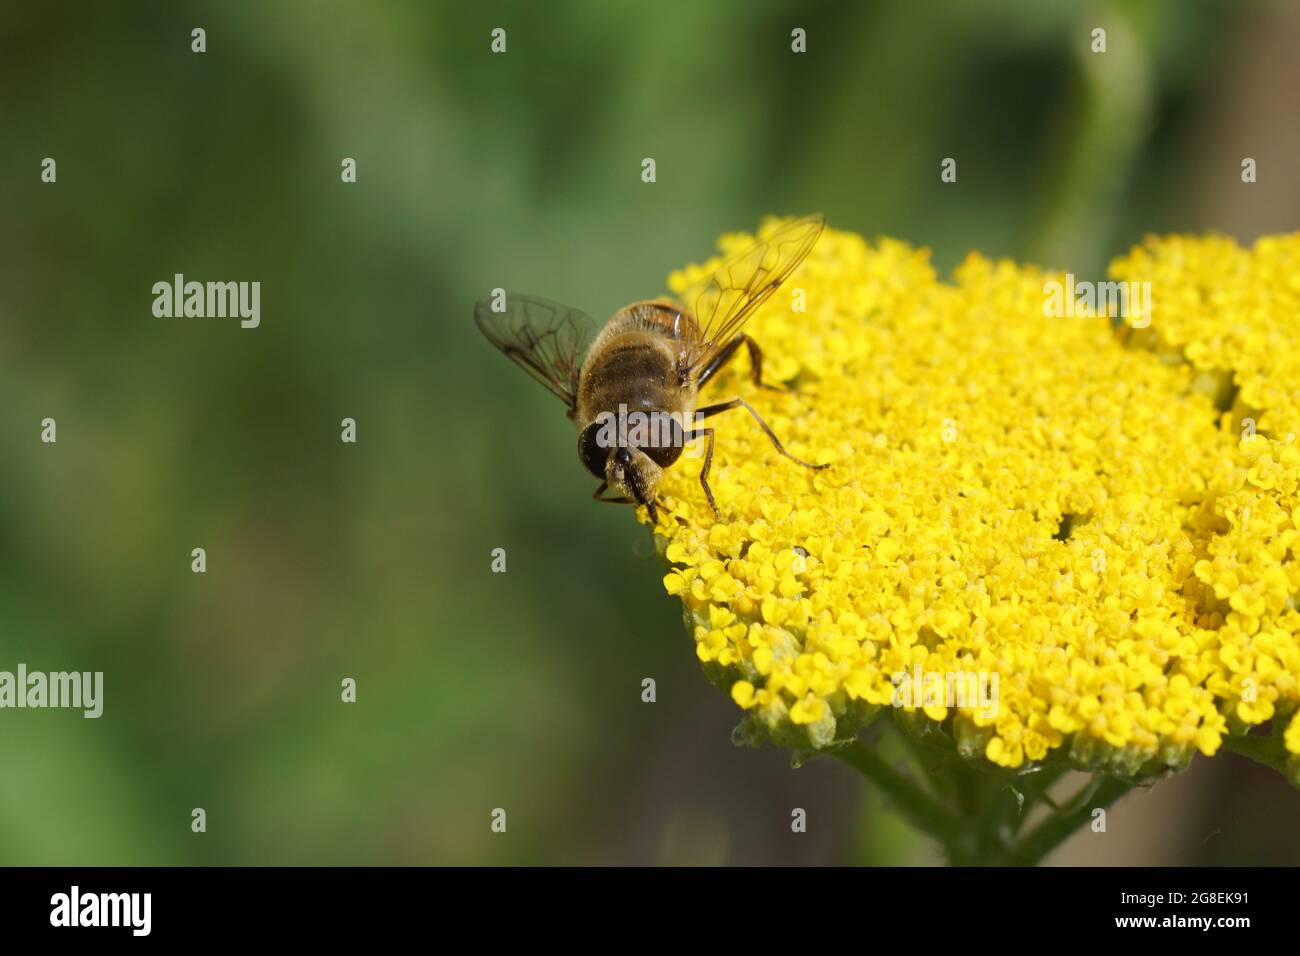 Common drone fly Eristalis tenax, family Syrphidae on yellow flowers of thousand-leaf, yarrow (Achillea filipendulina 'Cloth of gold'), Asteraceae Stock Photo